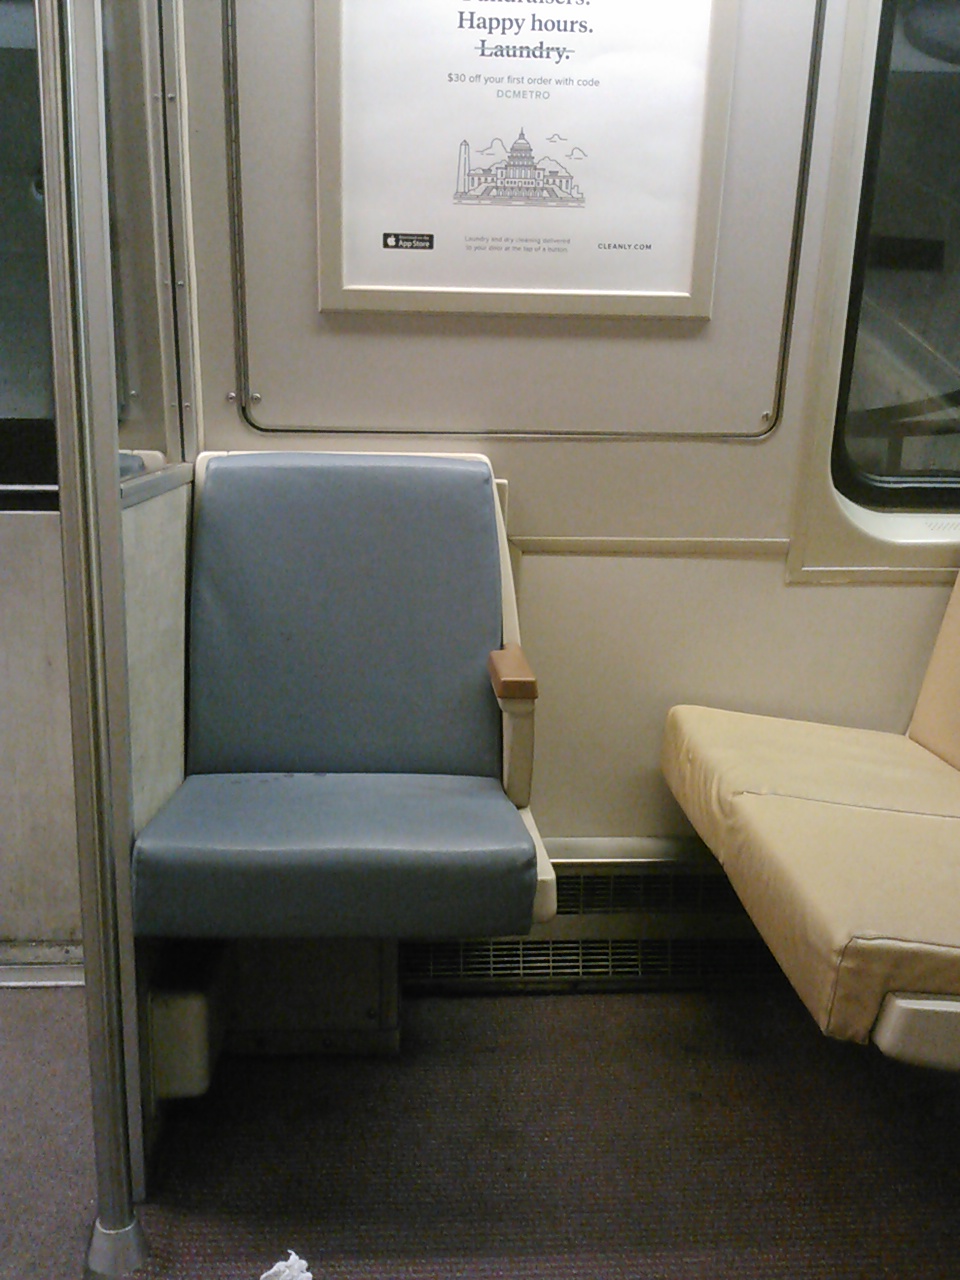 WMATA/DC Metro 1000-series (Car 1536?) single seat with arm-rest, 
providing more seating space than newer model cars, especially the 7000 
series. For further details, please visit www.wirelessnotes.org.